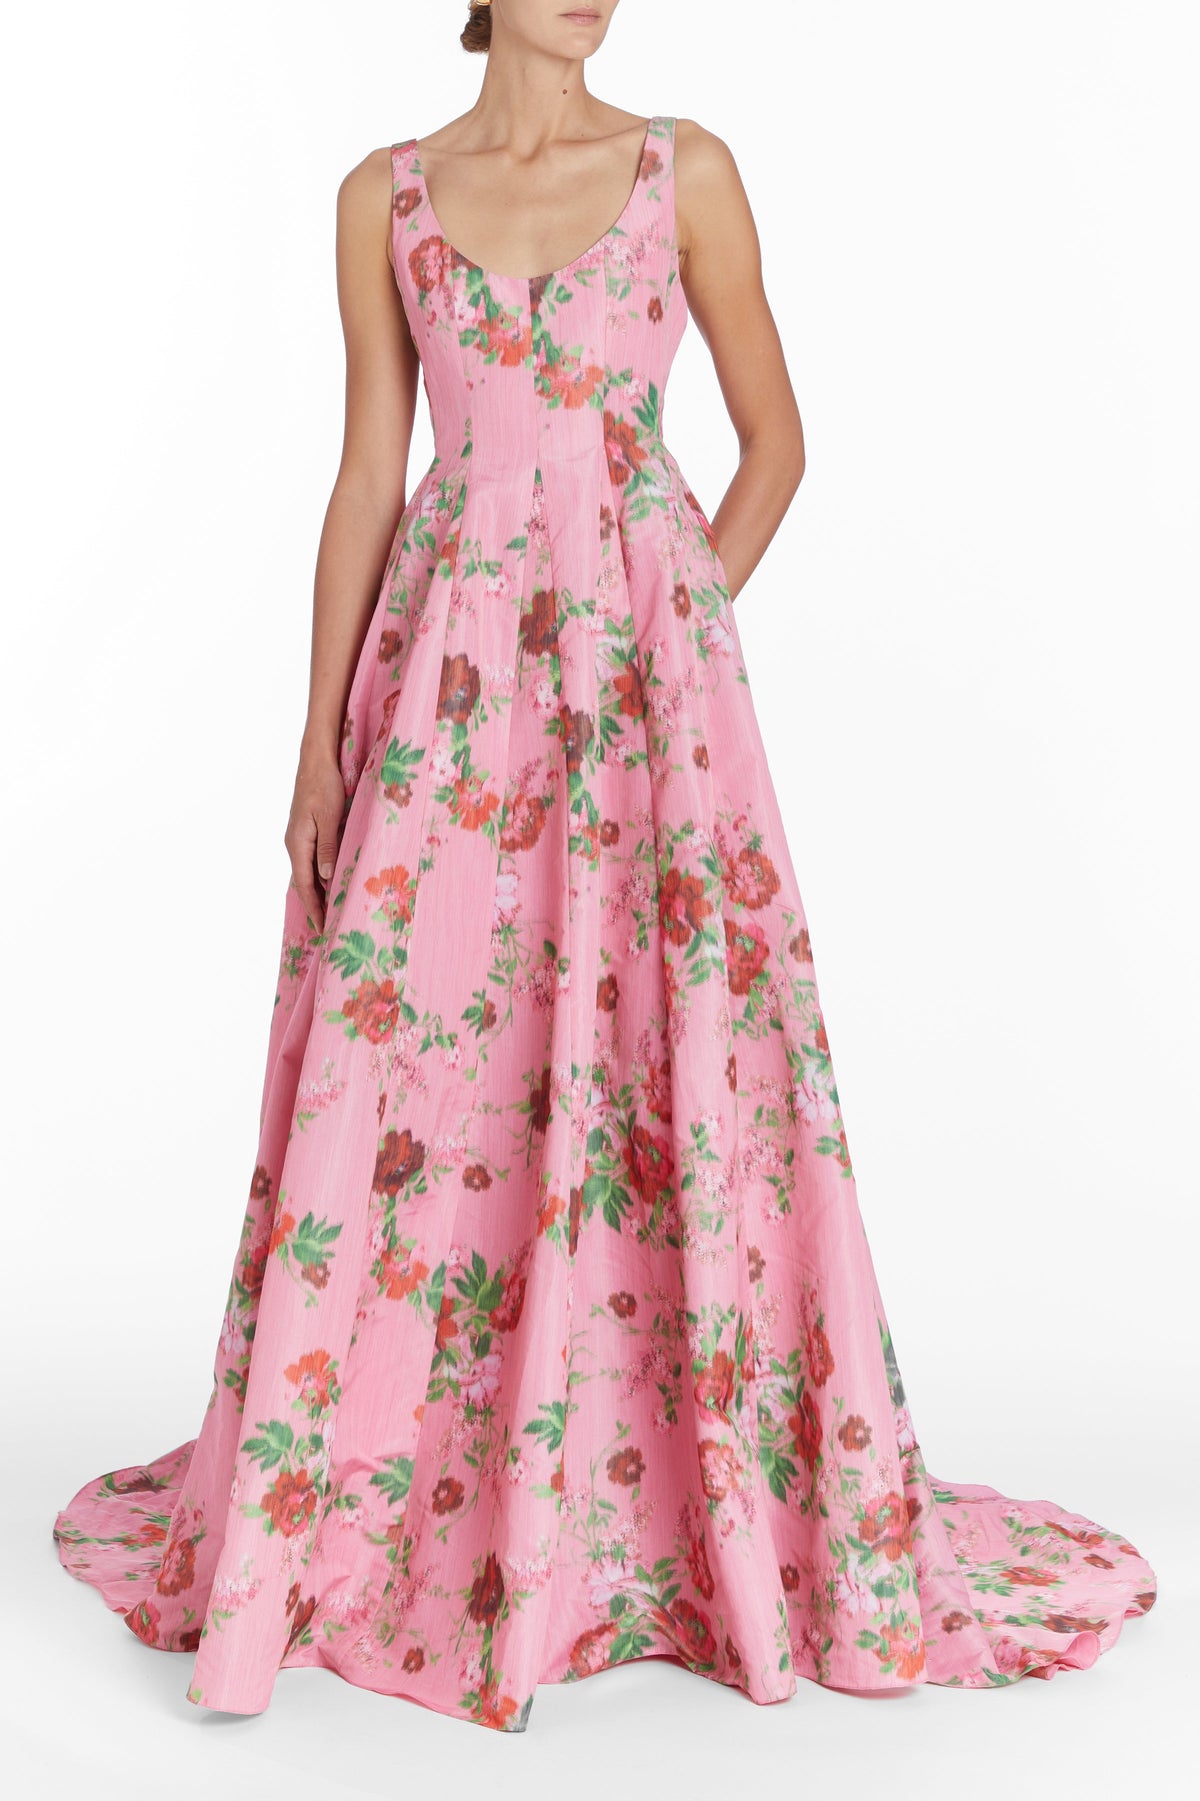 Botticelli Pink Floral Gown